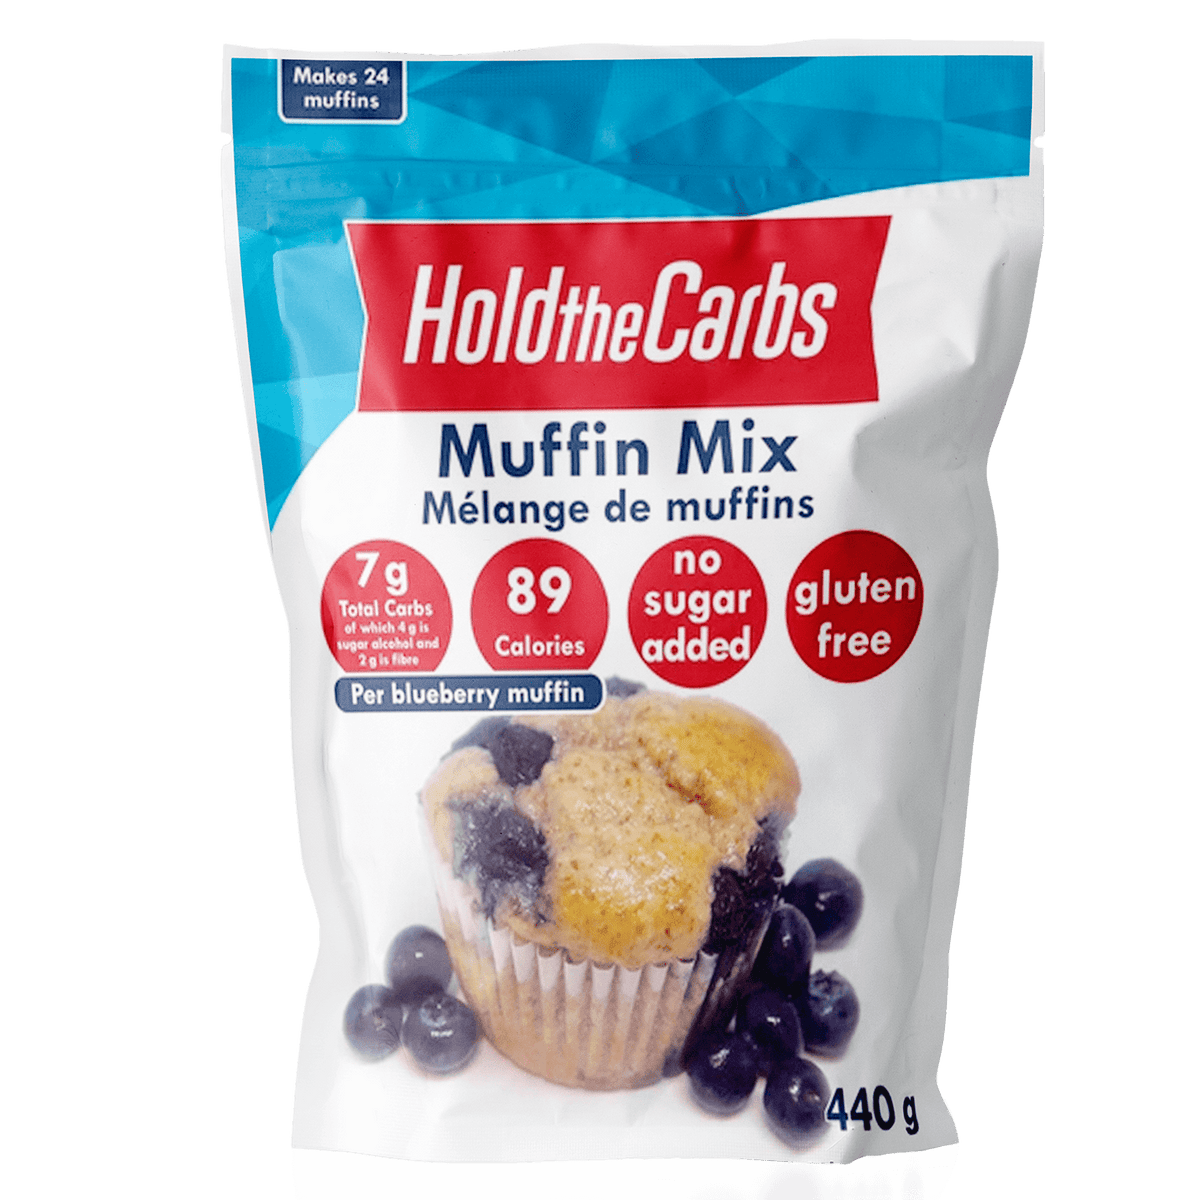 Are Carbs the Catalyst for Muffin Tops? - Health Journal